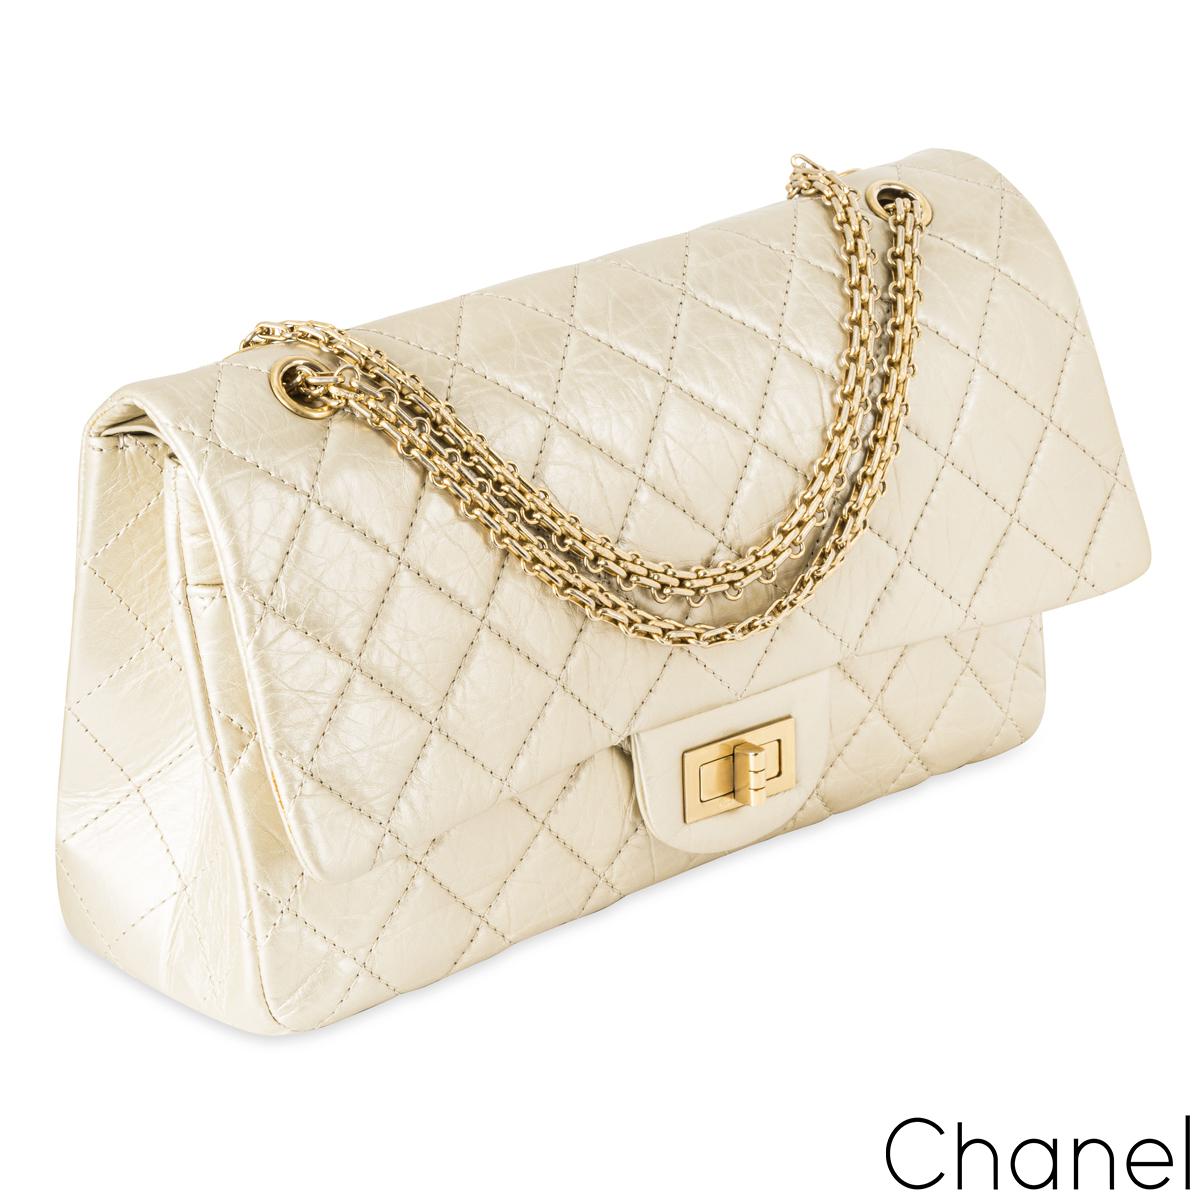 A Chic Chanel 2.55 Reissue Maxi Double Flap Handbag. The exterior of this reissue 2.55 is crafted in metallic cream distressed leather with signature diamond stitching and gold-tone hardware. It features a front flap, a mademoiselle turn lock